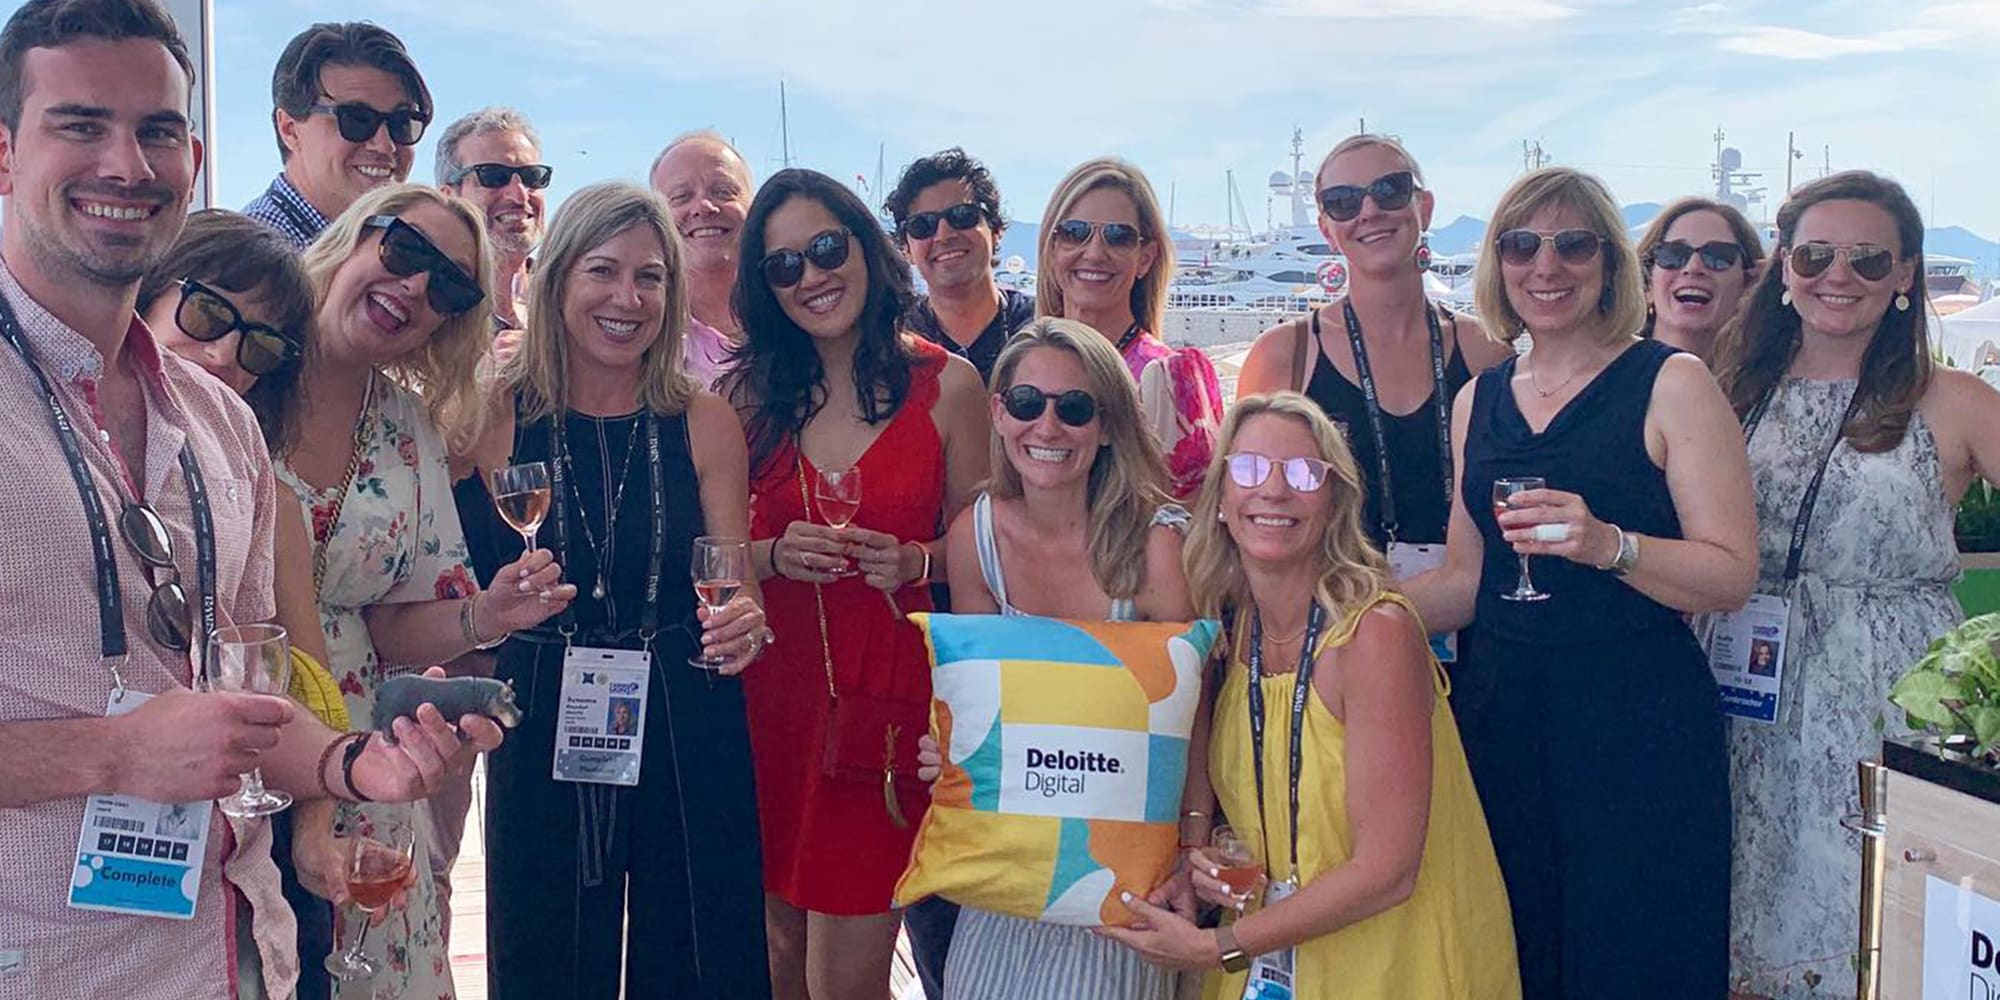 The incredible Deloitte, Deloitte Digital, and Heat team that represented at Cannes Lions. 